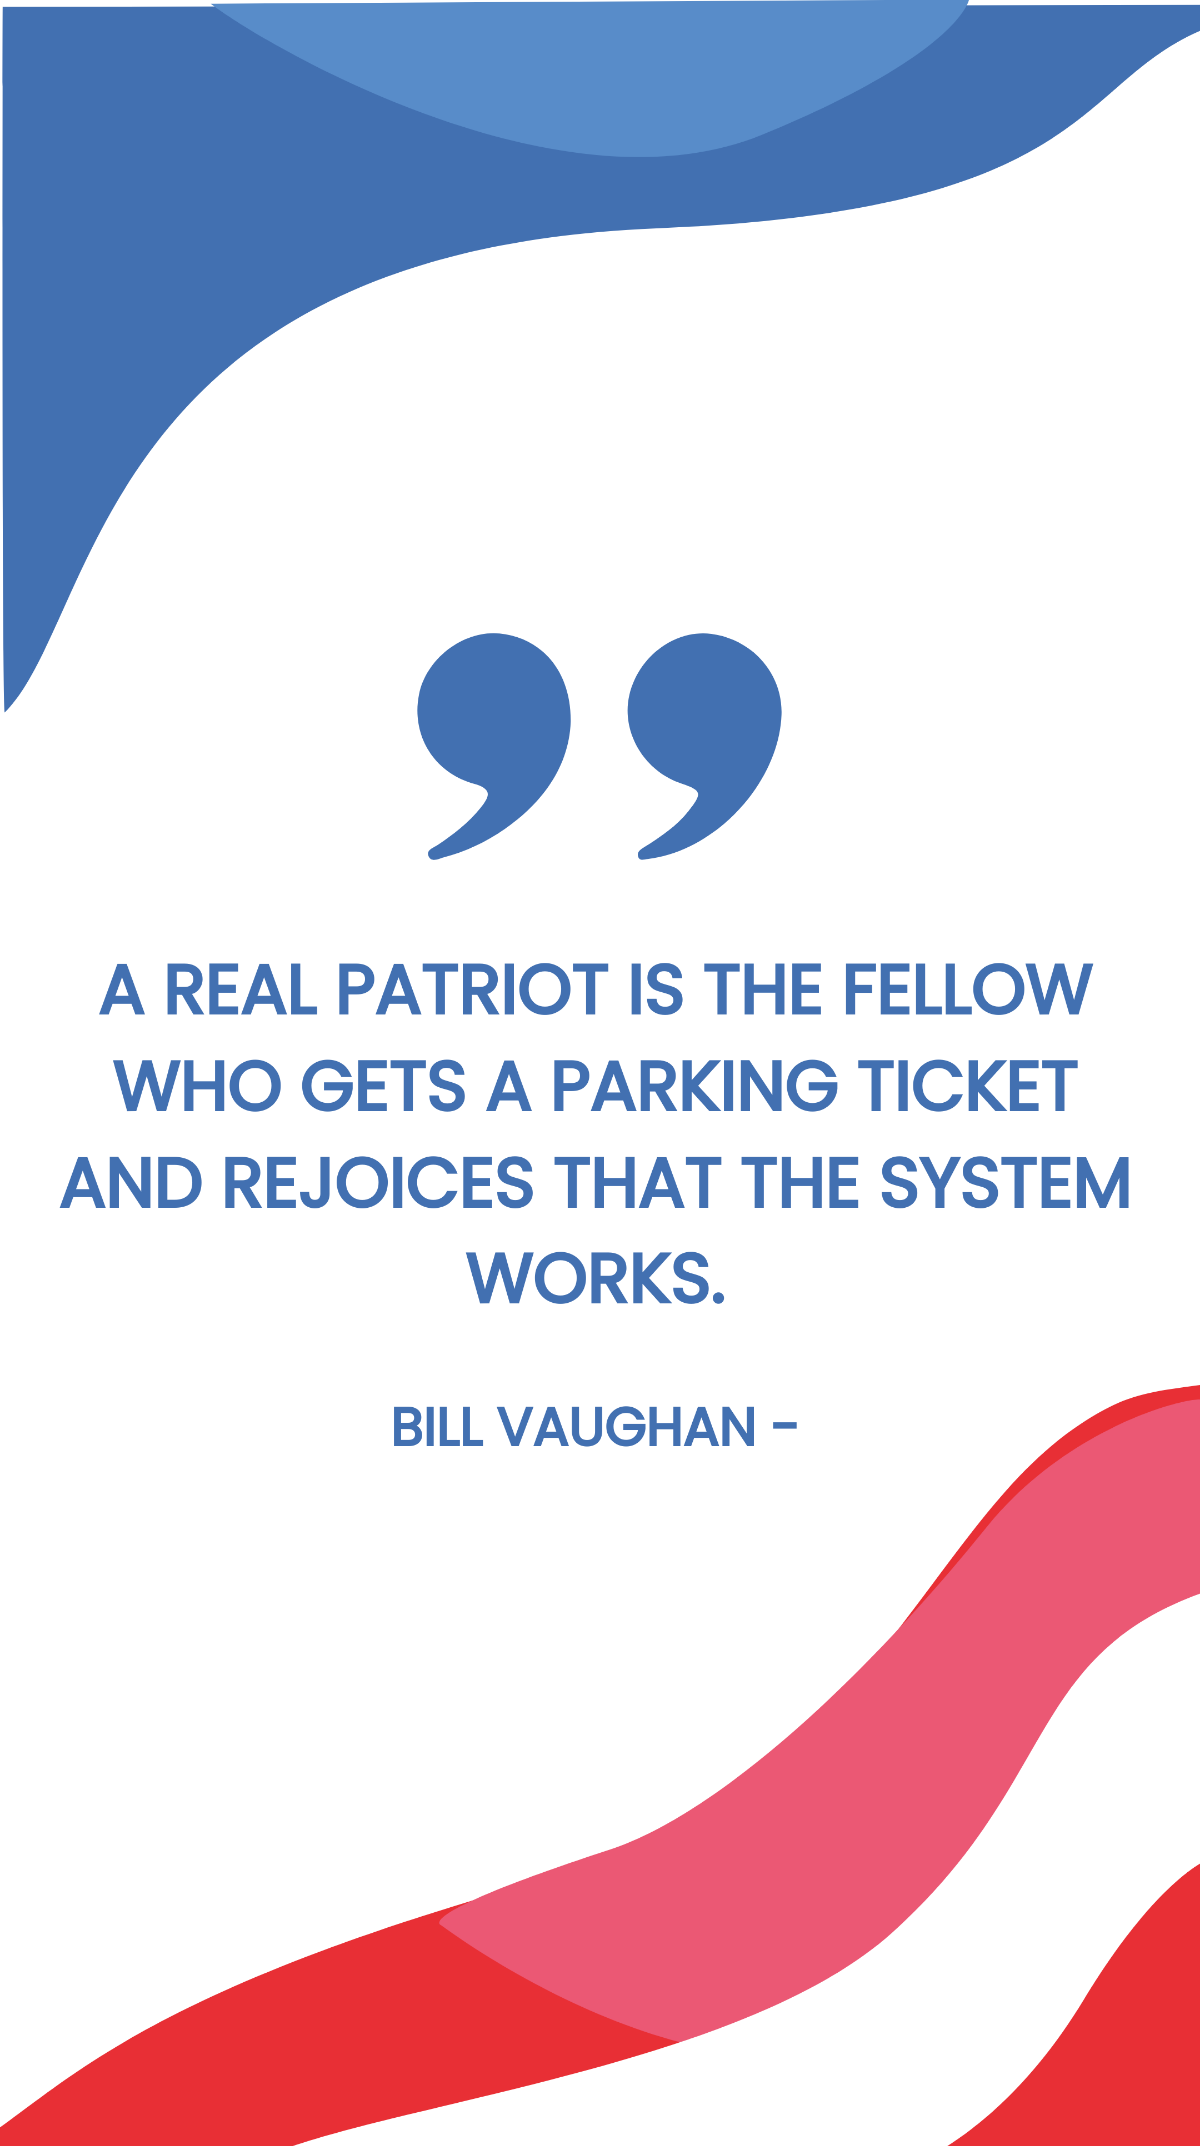 Bill Vaughan - A real patriot is the fellow who gets a parking ticket and rejoices that the system works. Template